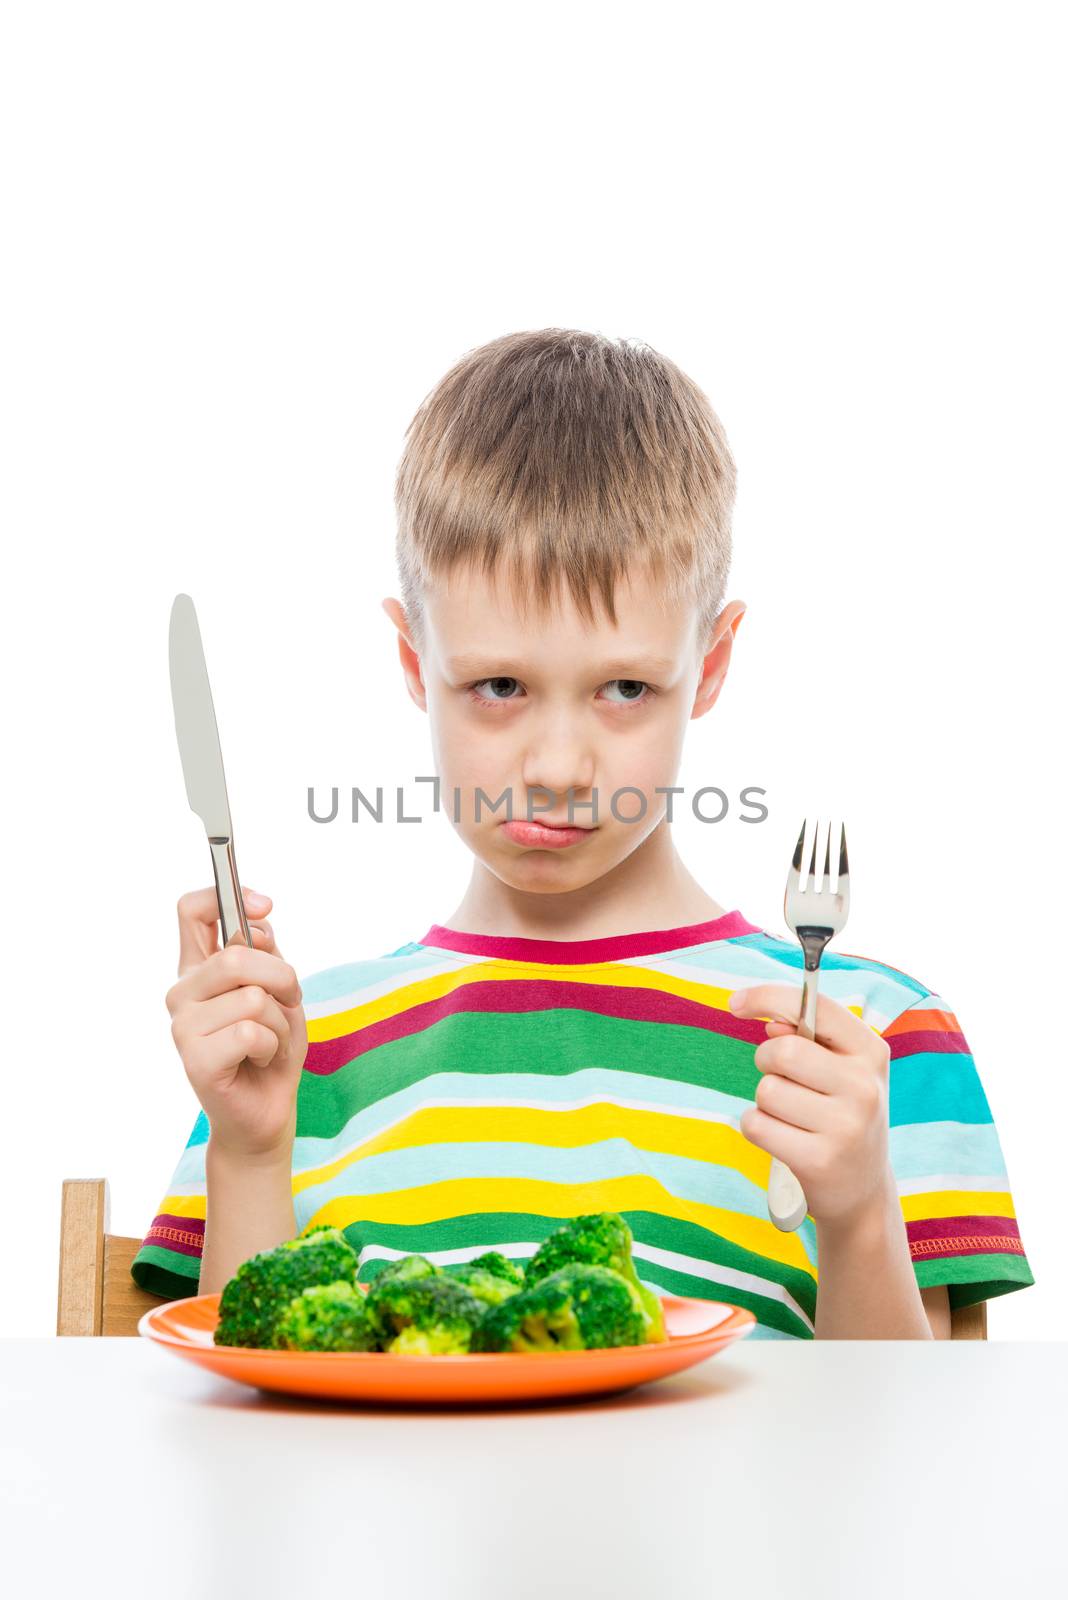 The boy with the unloved food broccoli on a white background by kosmsos111